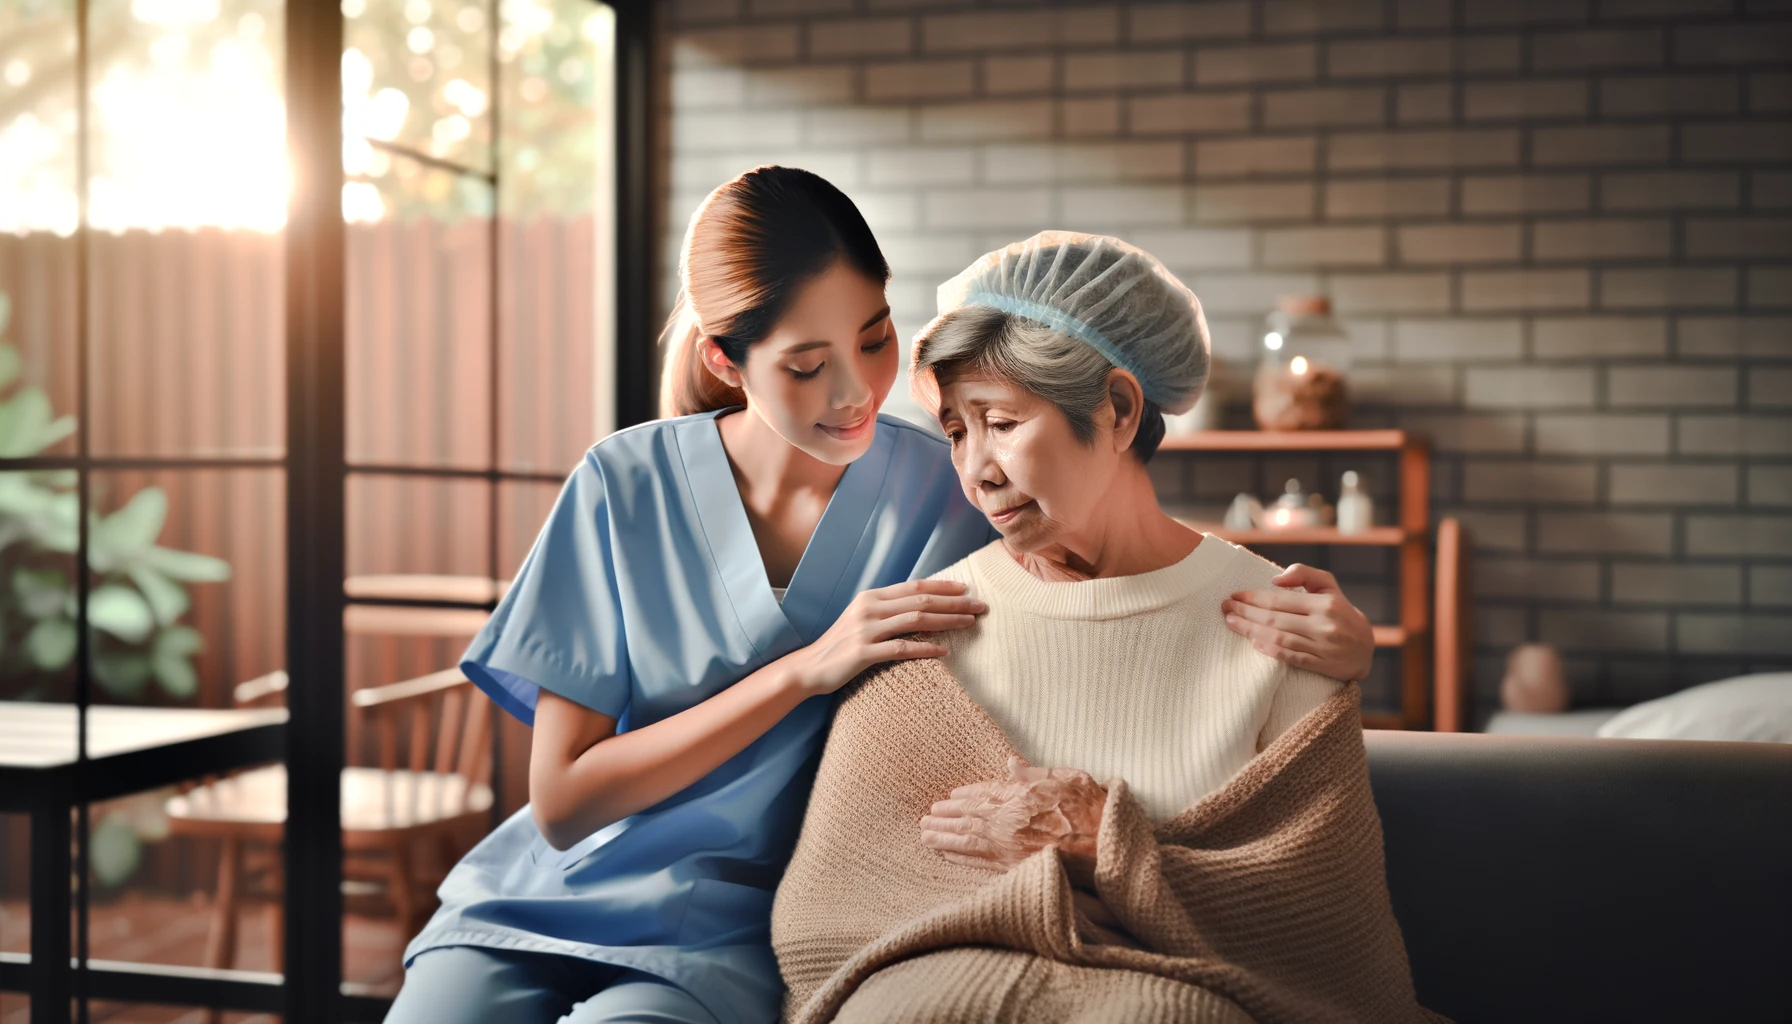 Senior Home Care Near Me - an AlwaysFamily caregiver providing in-home care to an elderly woman